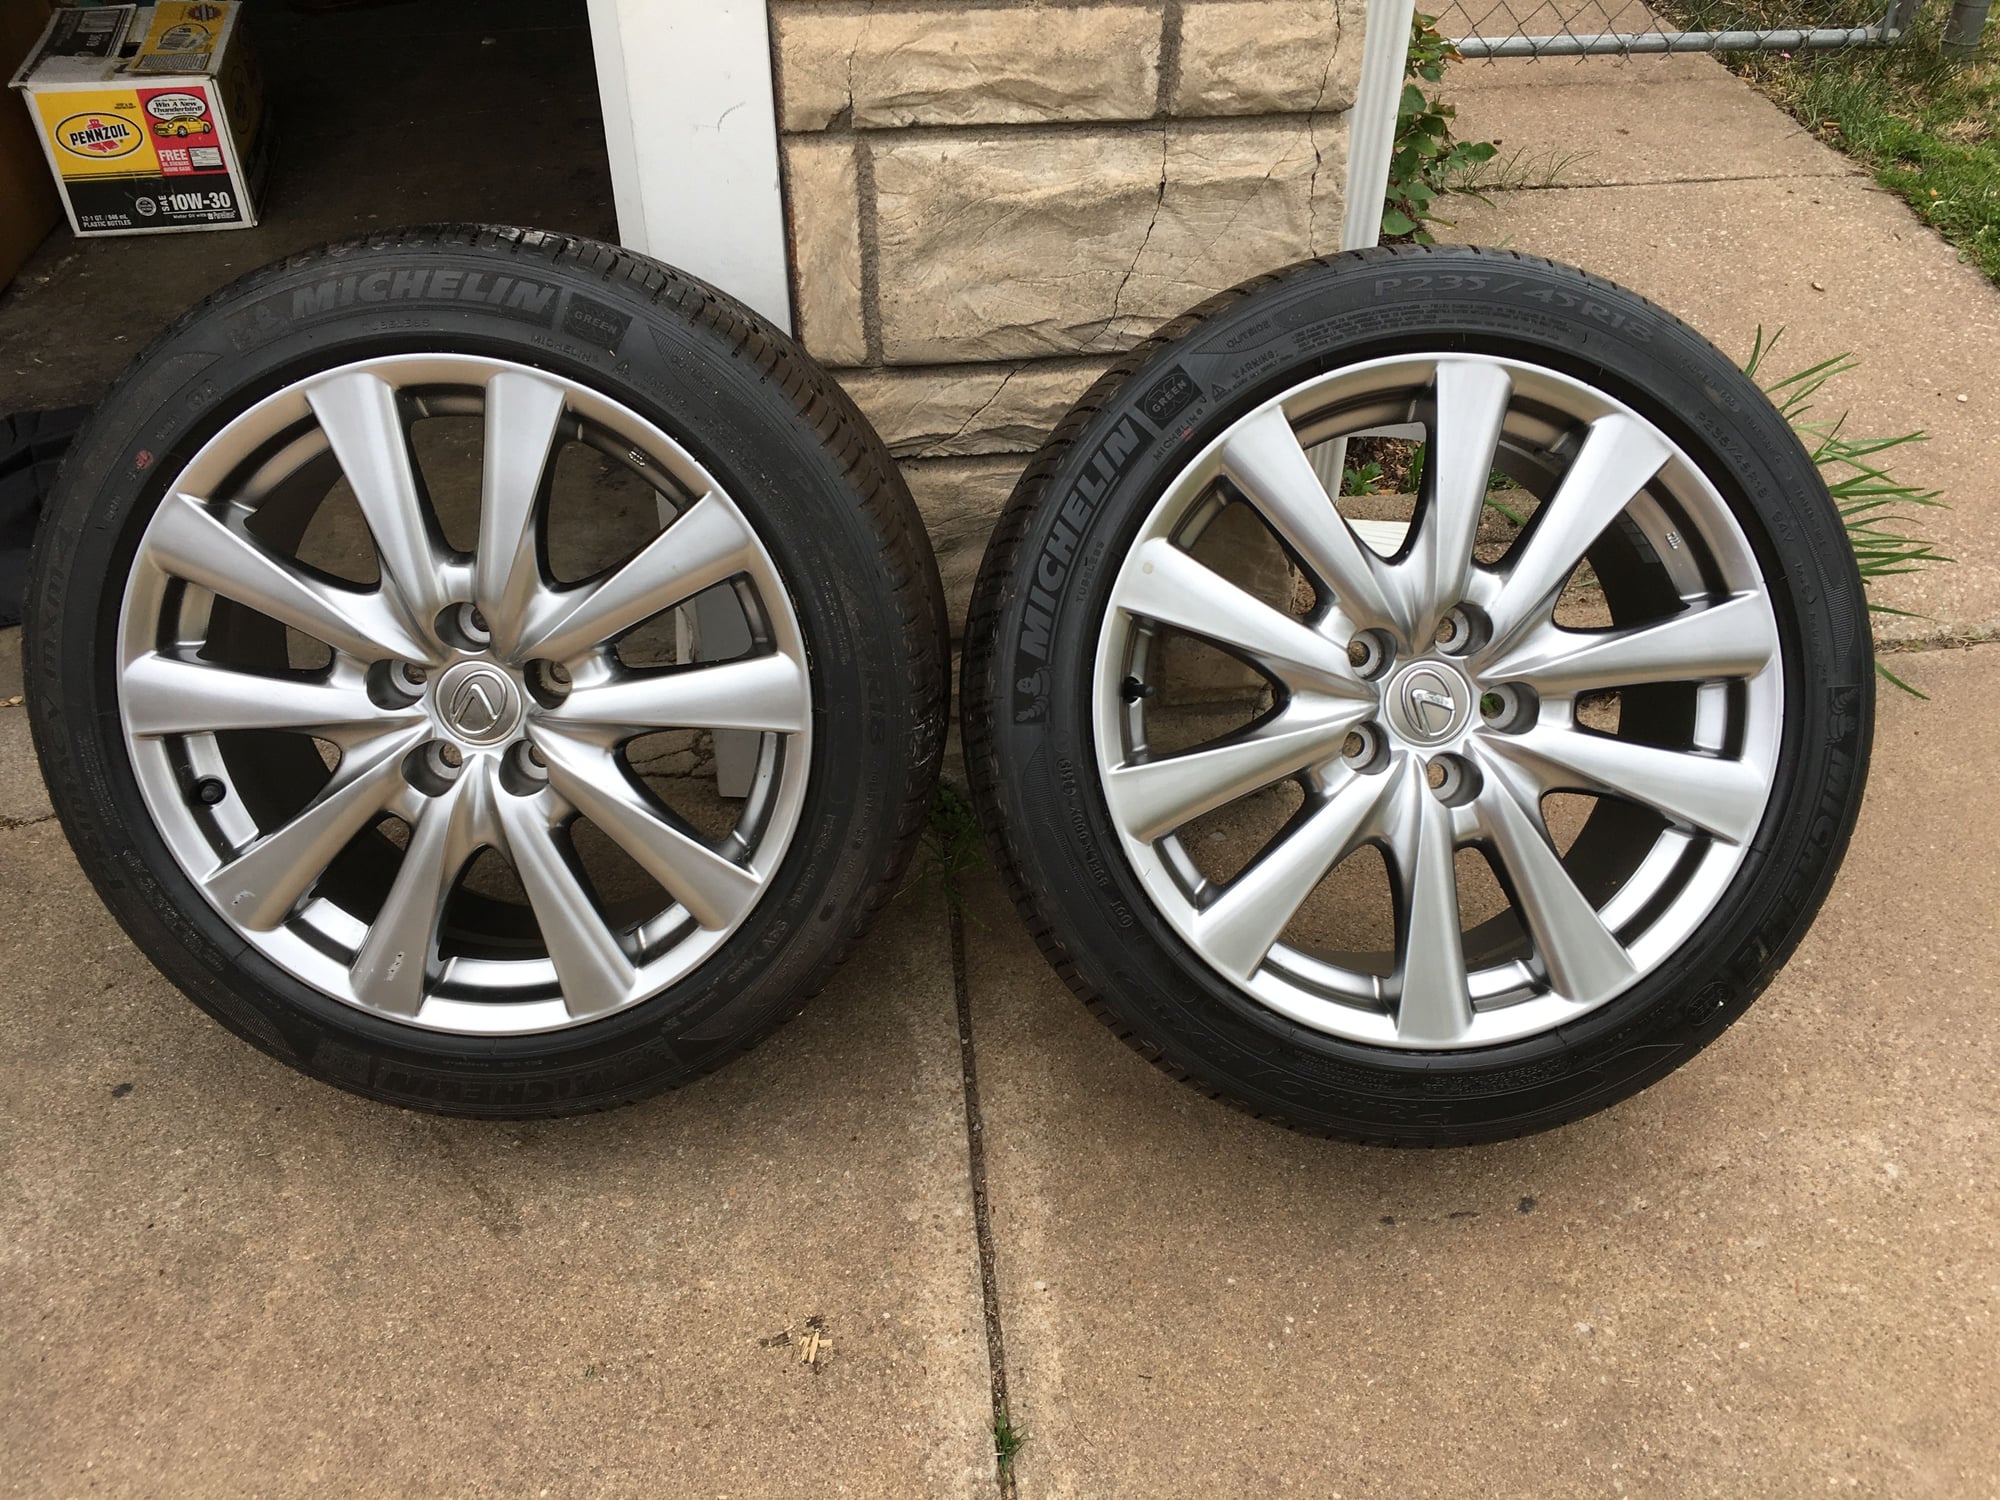 Wheels and Tires/Axles - ISO F  Sport Wheels With or Without Tires - New or Used - 2007 to 2011 Lexus GS350 - Wichita, KS 67216, United States